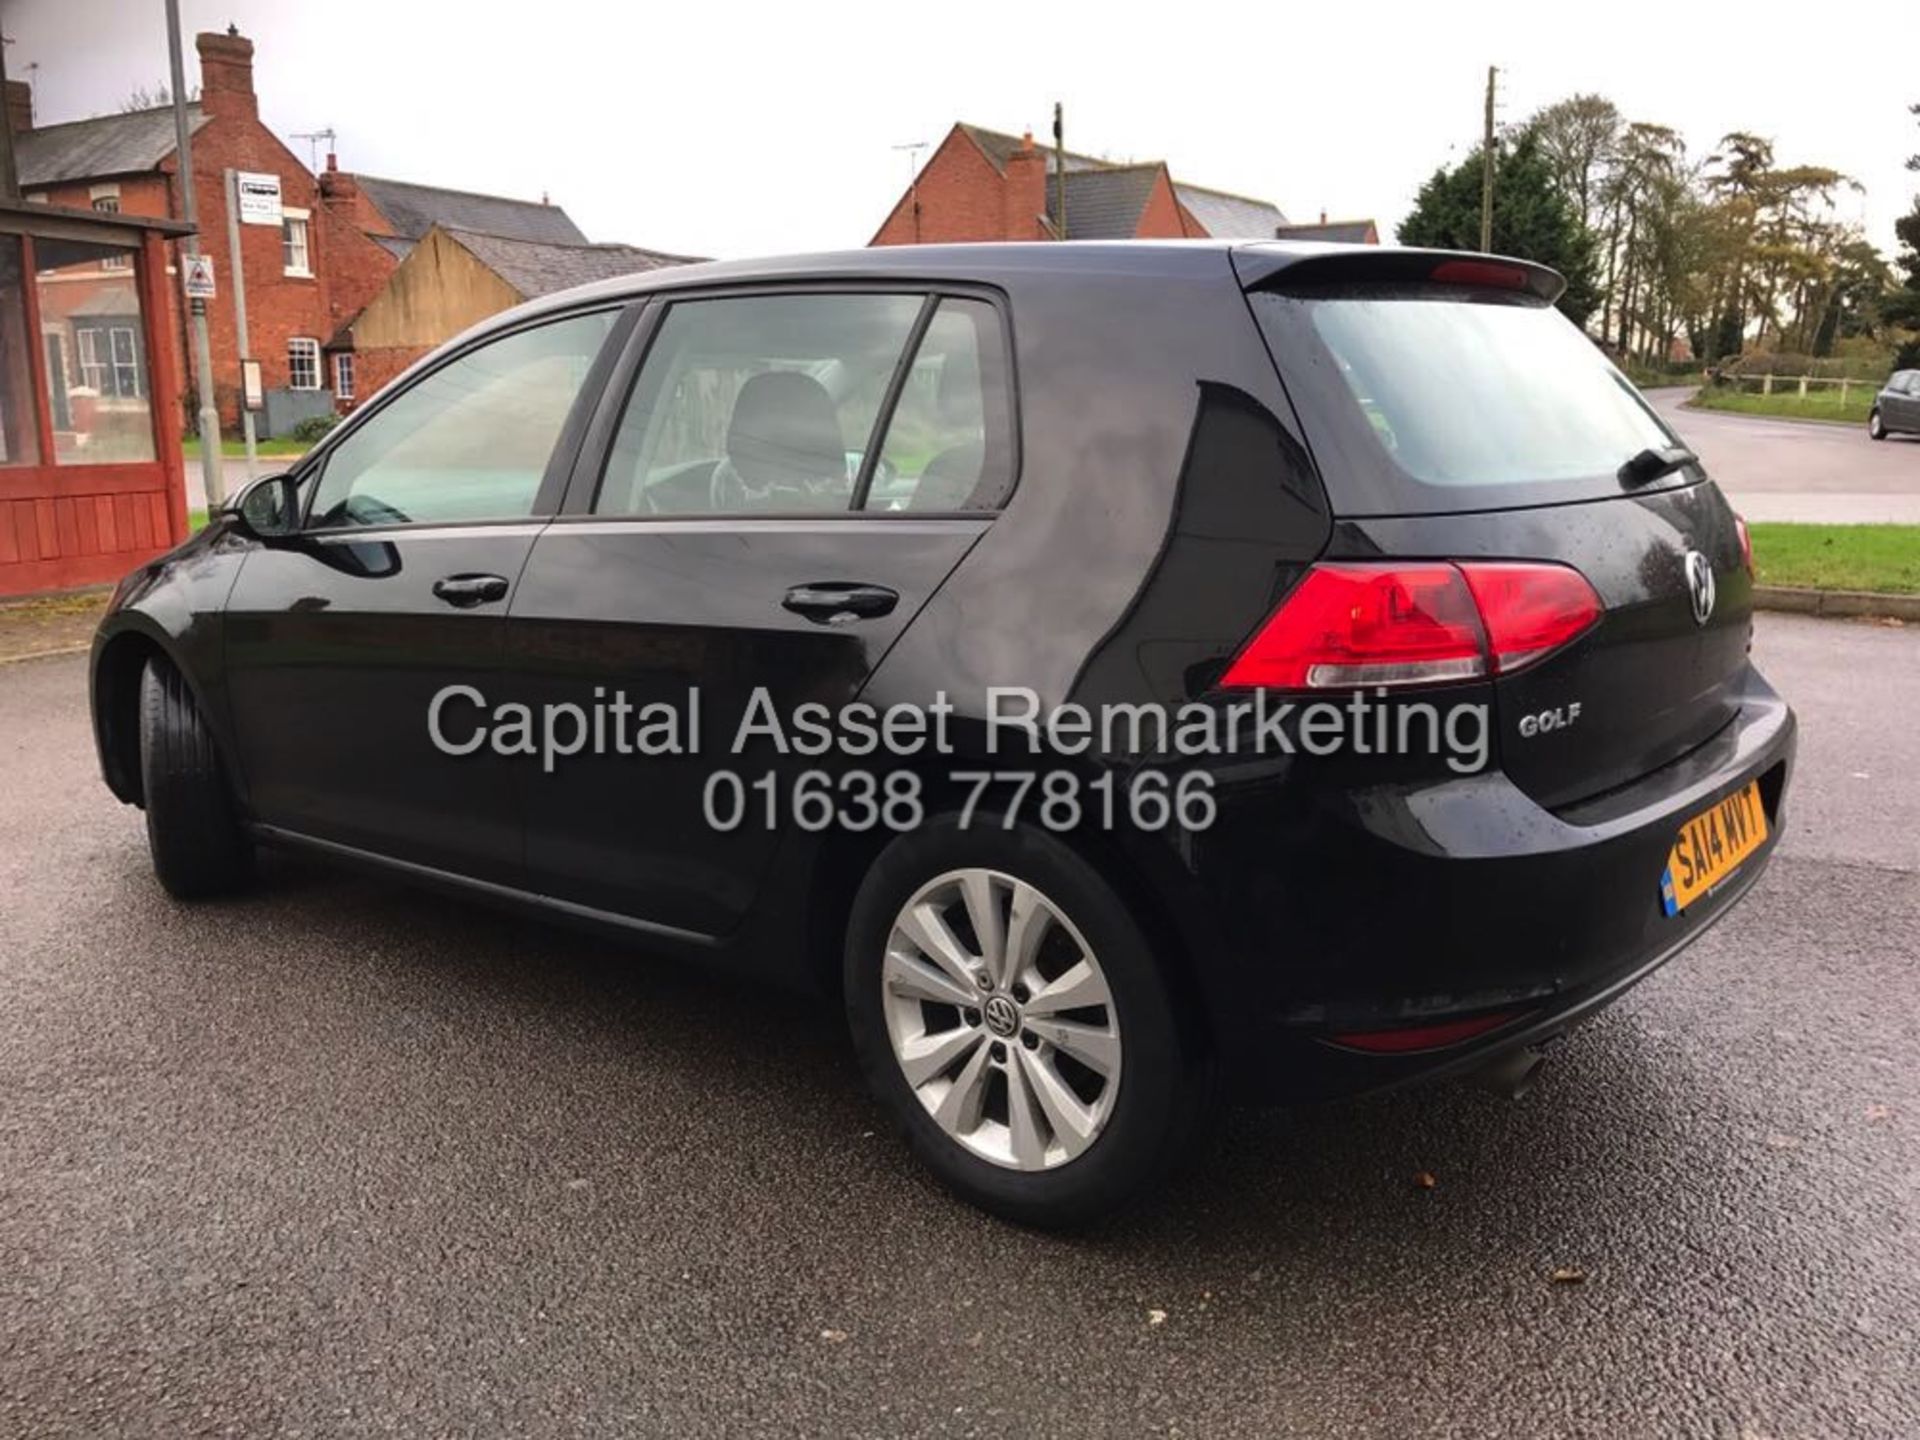 (ON SALE) VOLKSWAGEN GOLF 1.6TDI 7 SPEED DSG "SPECIAL EQUIPMENT" AIR CON - STOP/START-ELECTRIC PACK - Image 6 of 13